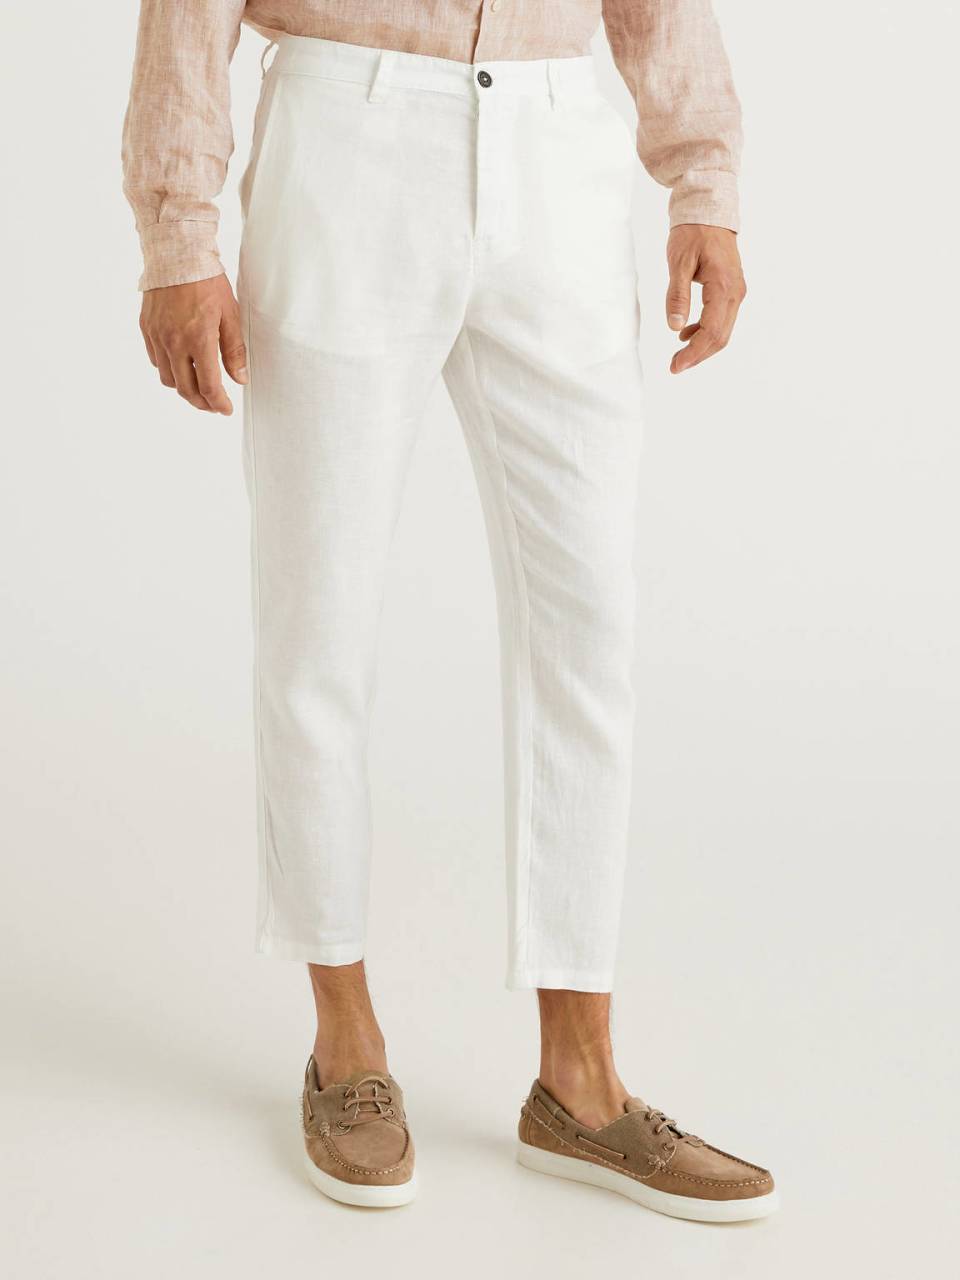 Benetton Chino pants in pure linen. 1